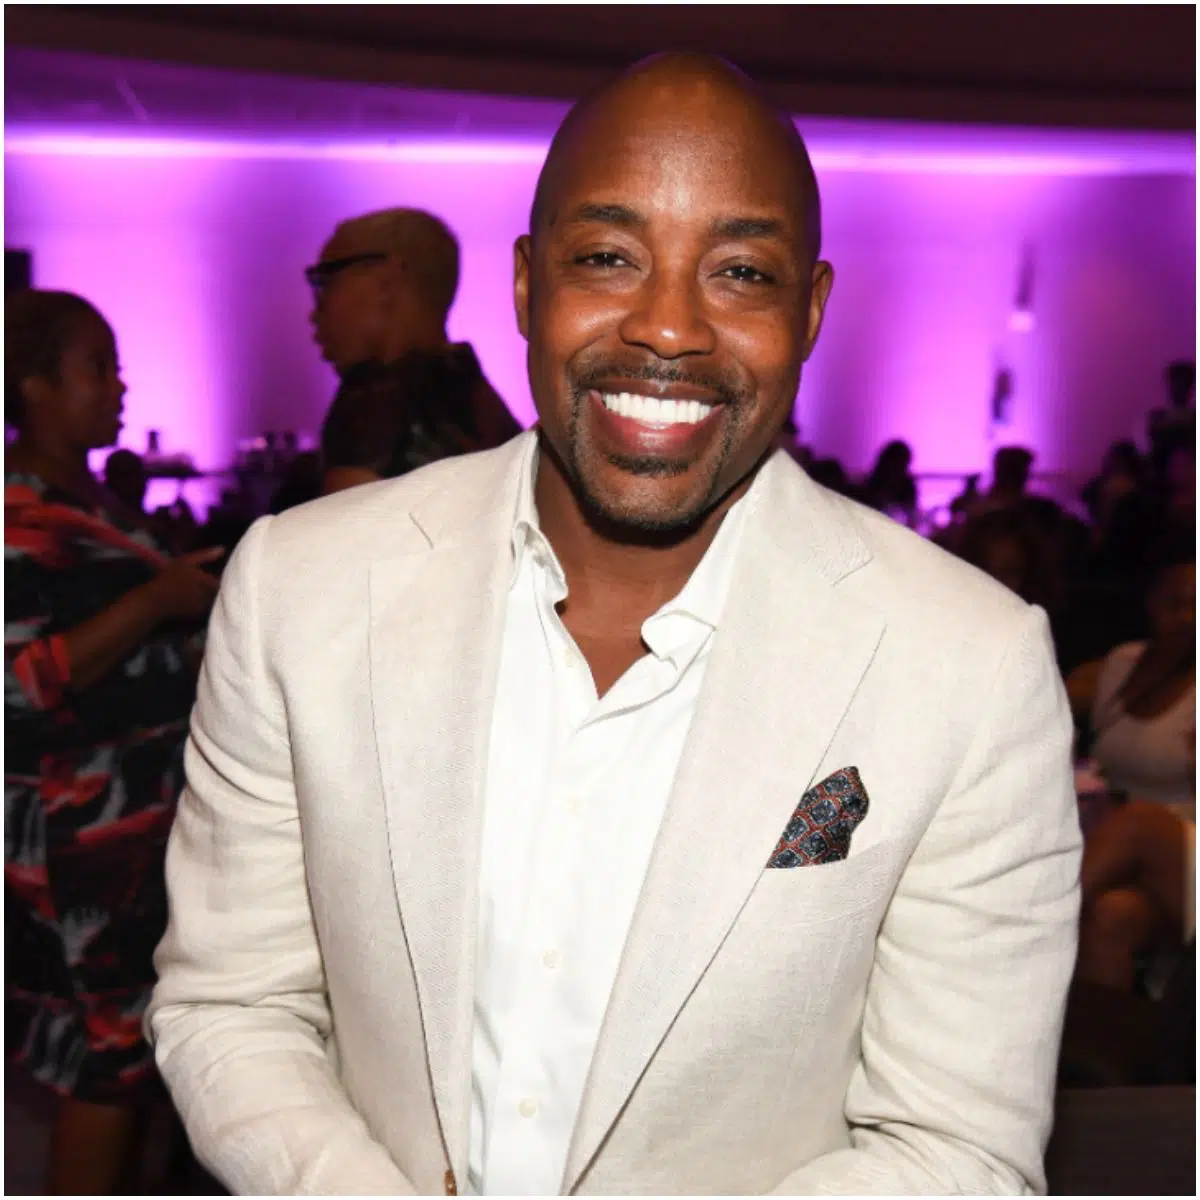 what is the net worth of Will Packer